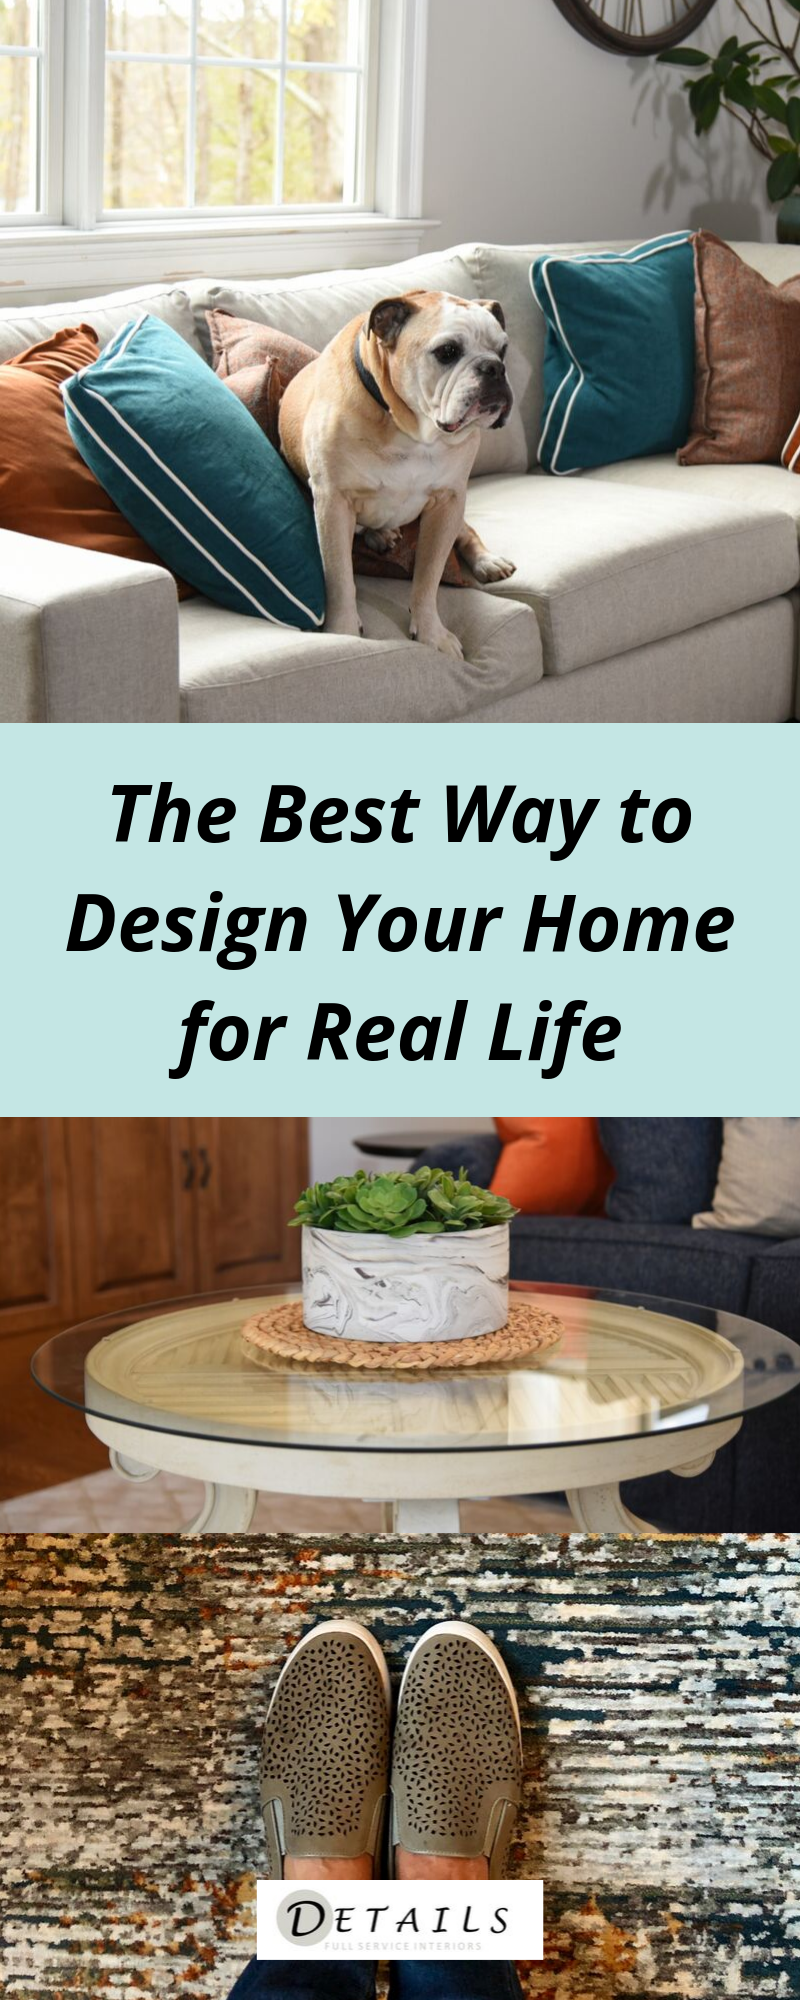 The Best Way to Design Your Home for Real Life